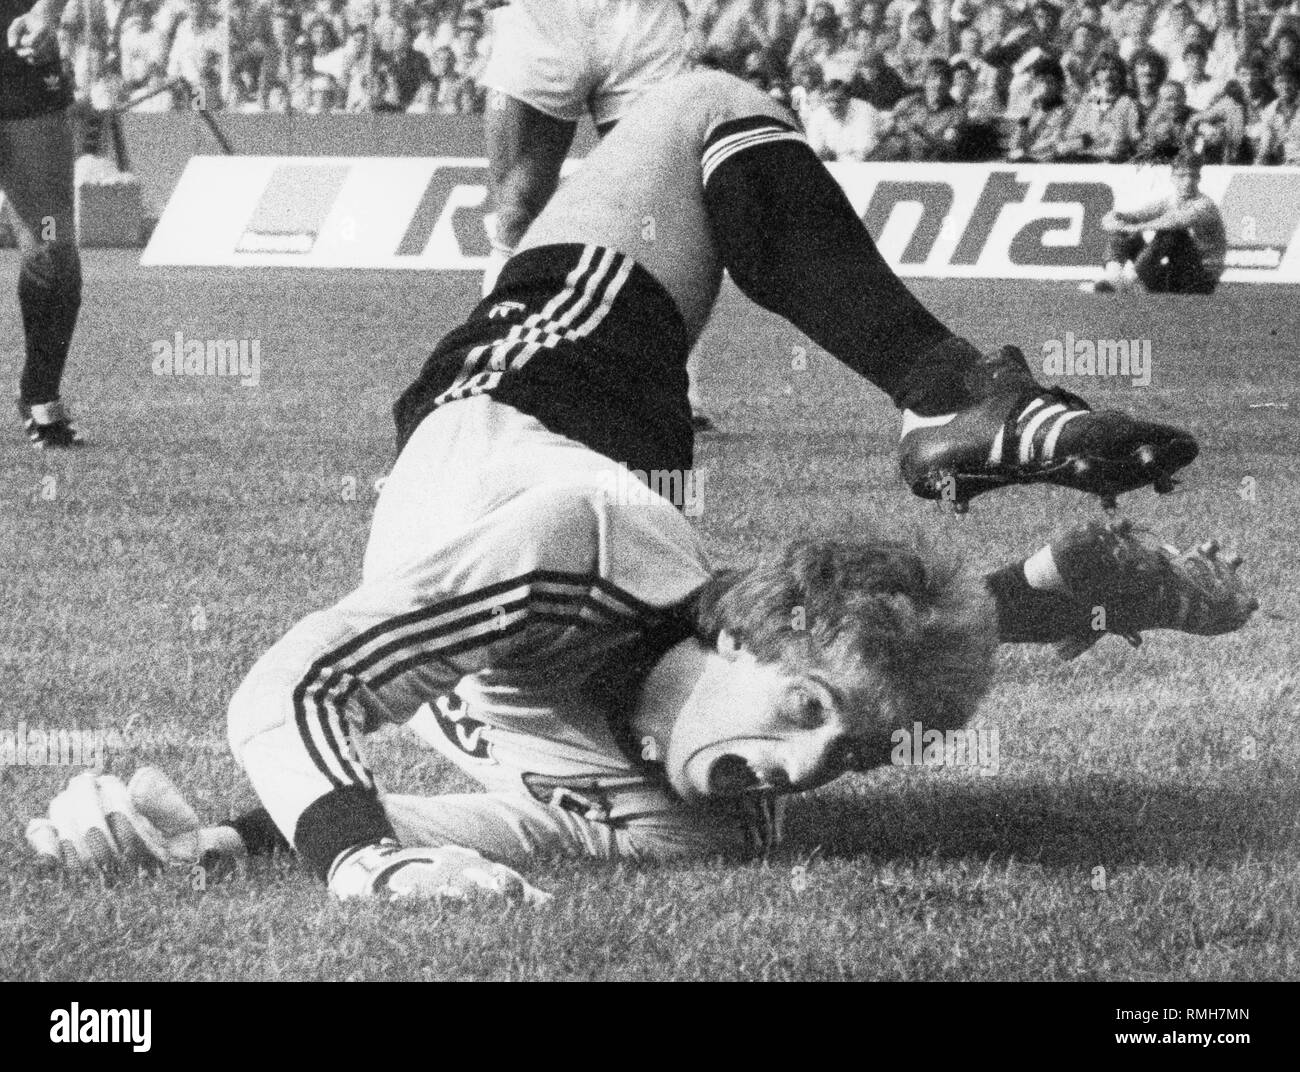 Ulrich 'Uli' Stein makes acrobatic effort during an international match between Germany and Brazil. Stock Photo